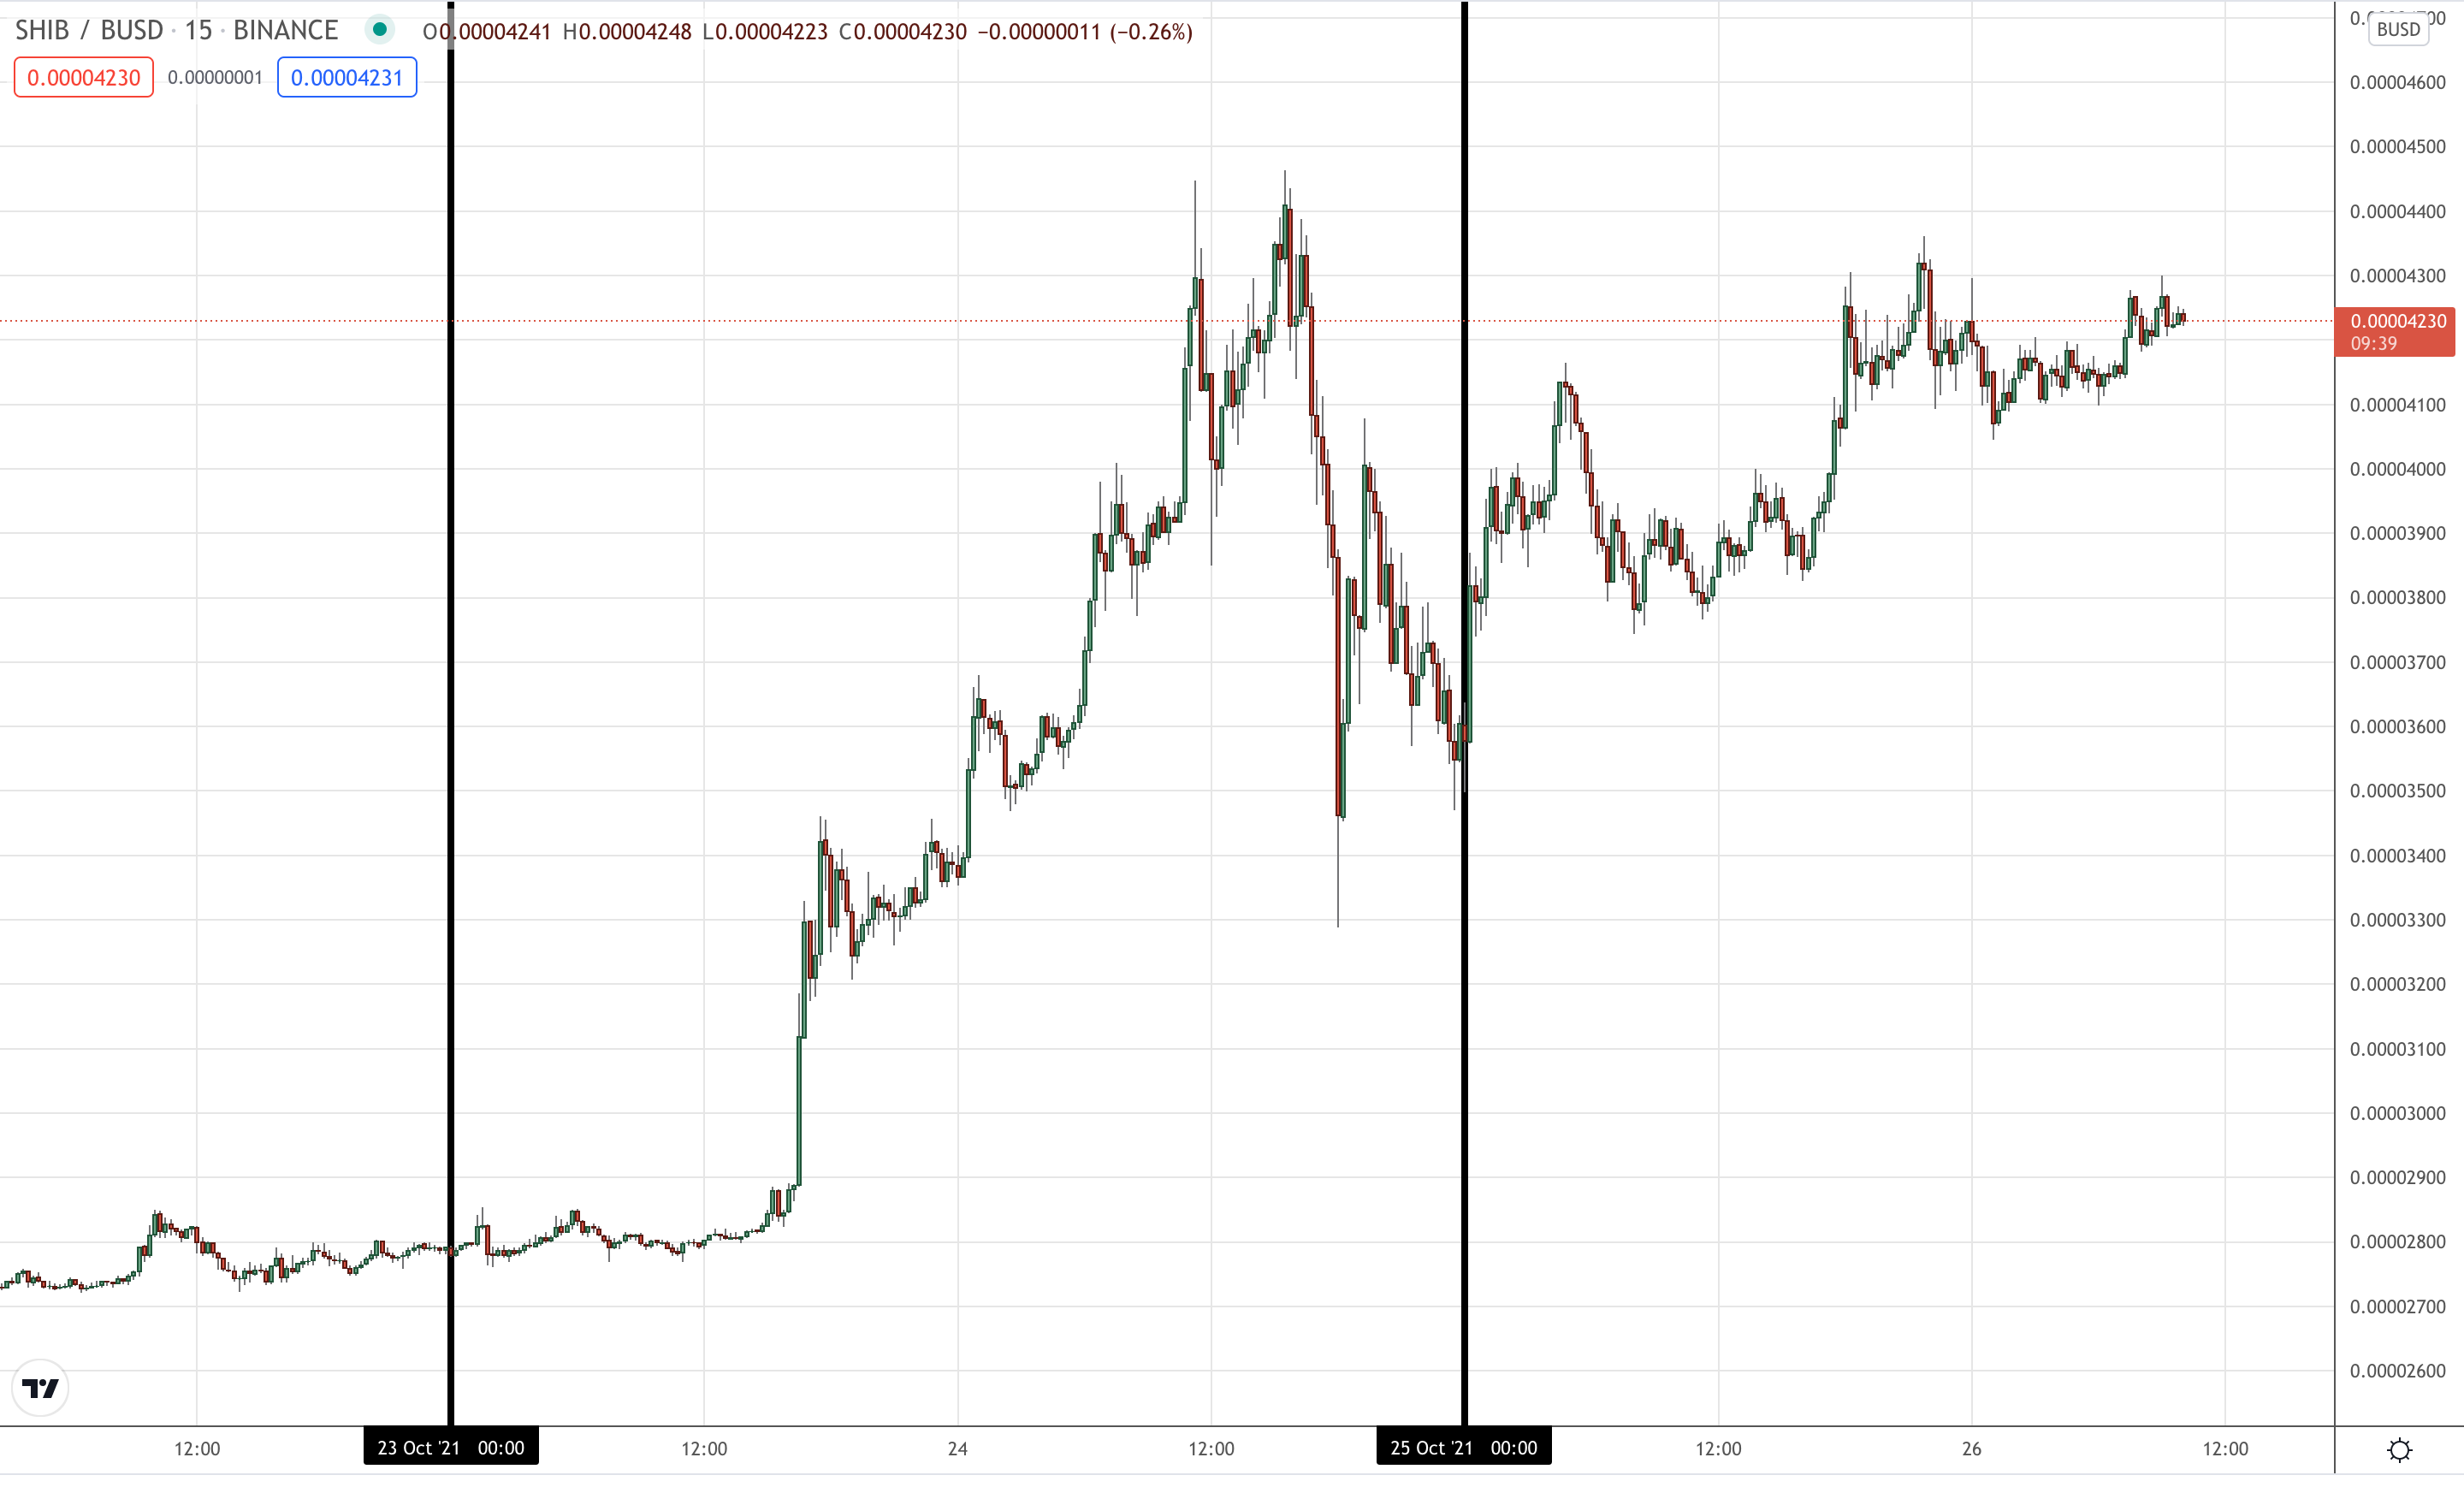 Shiba Inu coin price on a 15 minute chart.